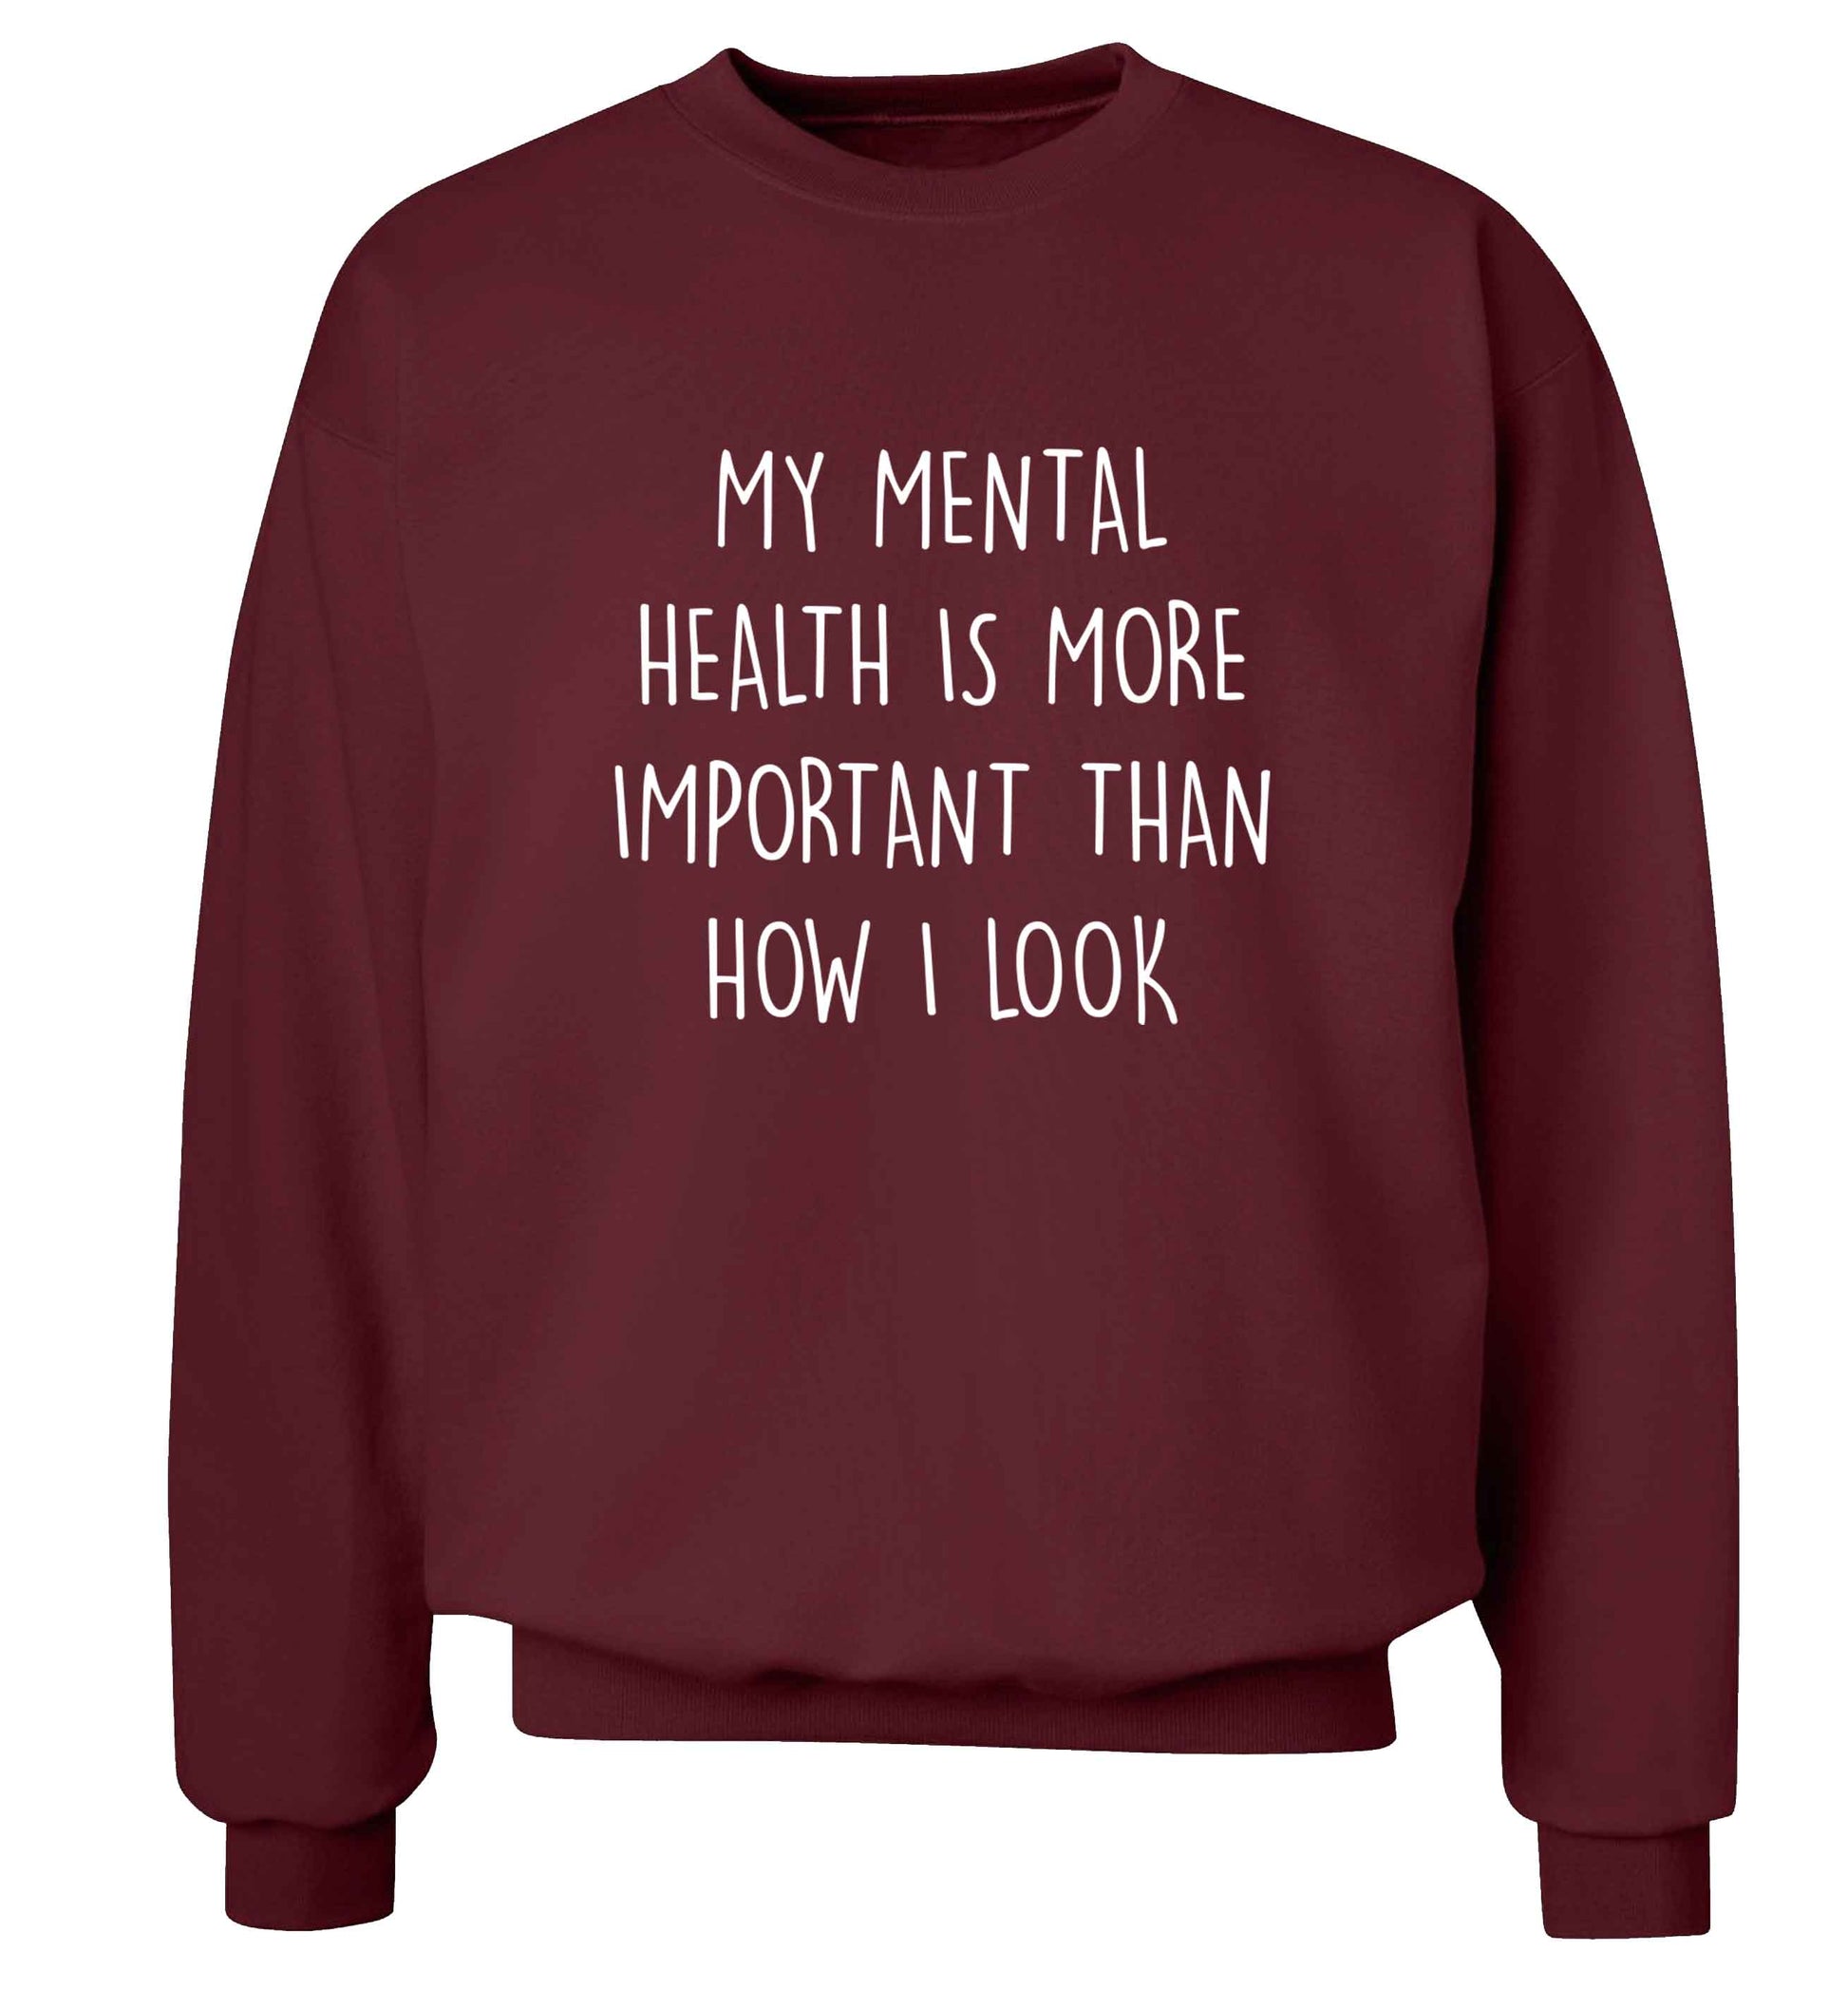 My mental health is more importnat than how I look adult's unisex maroon sweater 2XL